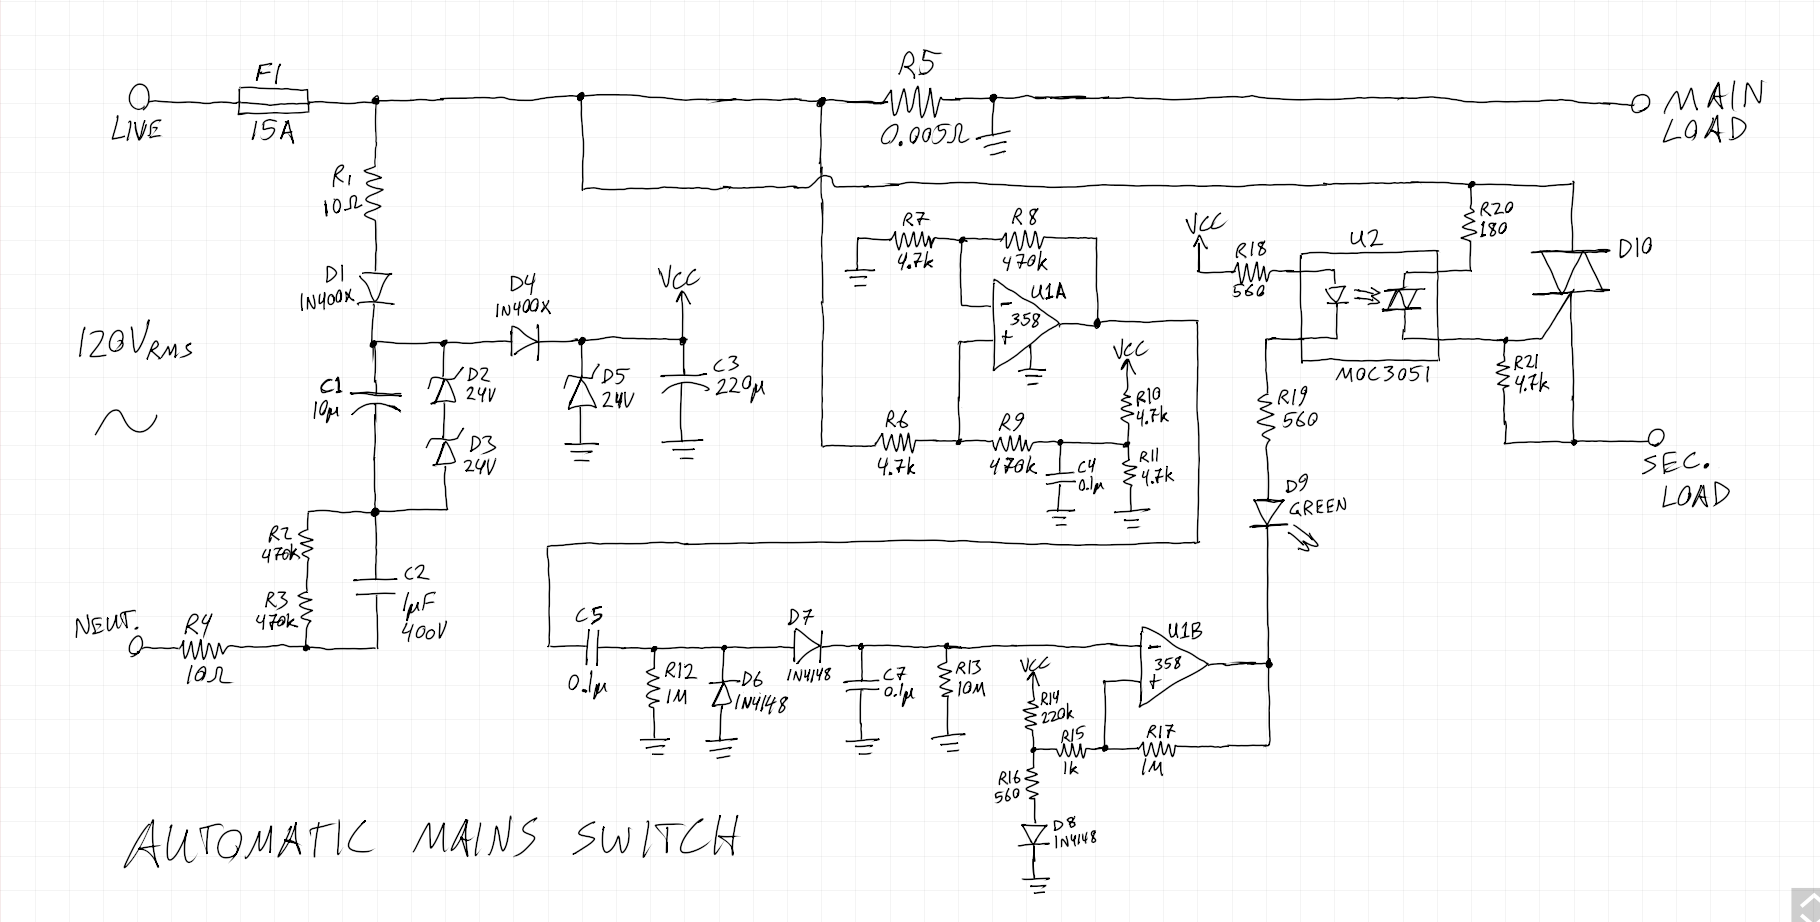 First concept for my automatic mains switch